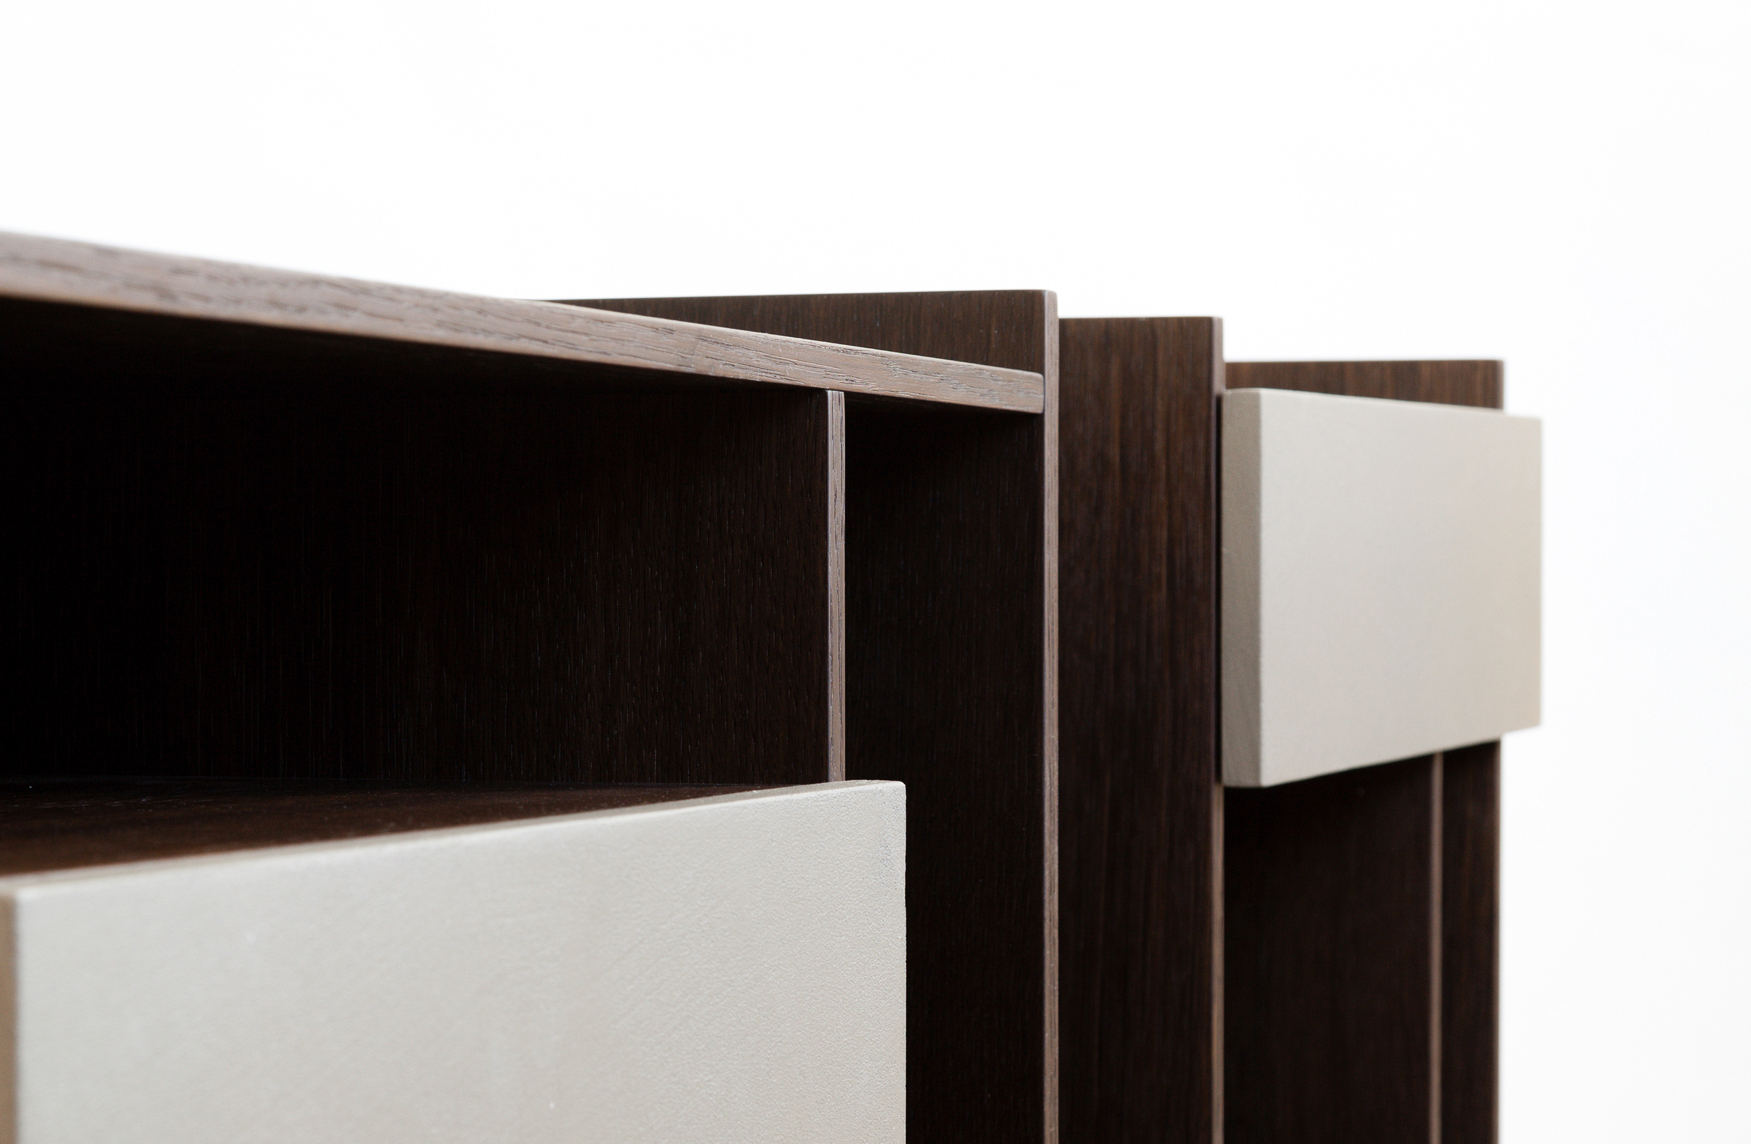 Detail of the Tip drawer units by Debiasi Sandri for Lema